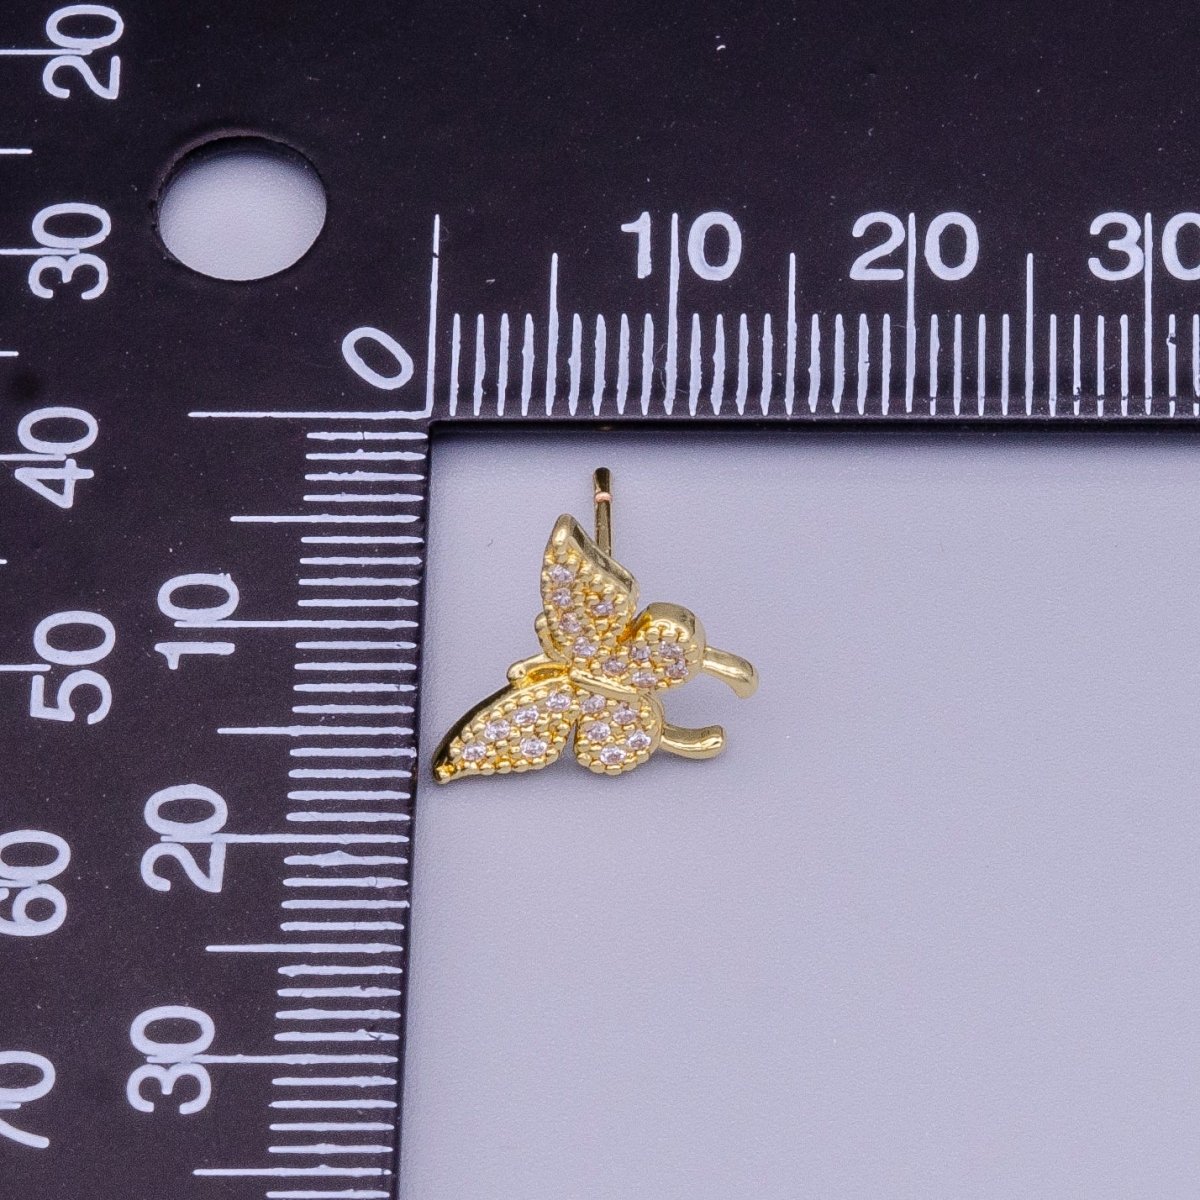 16K Gold Filled Butterfly Mariposa Wings Micro Paved CZ Stud Earrings | AD1525 - DLUXCA